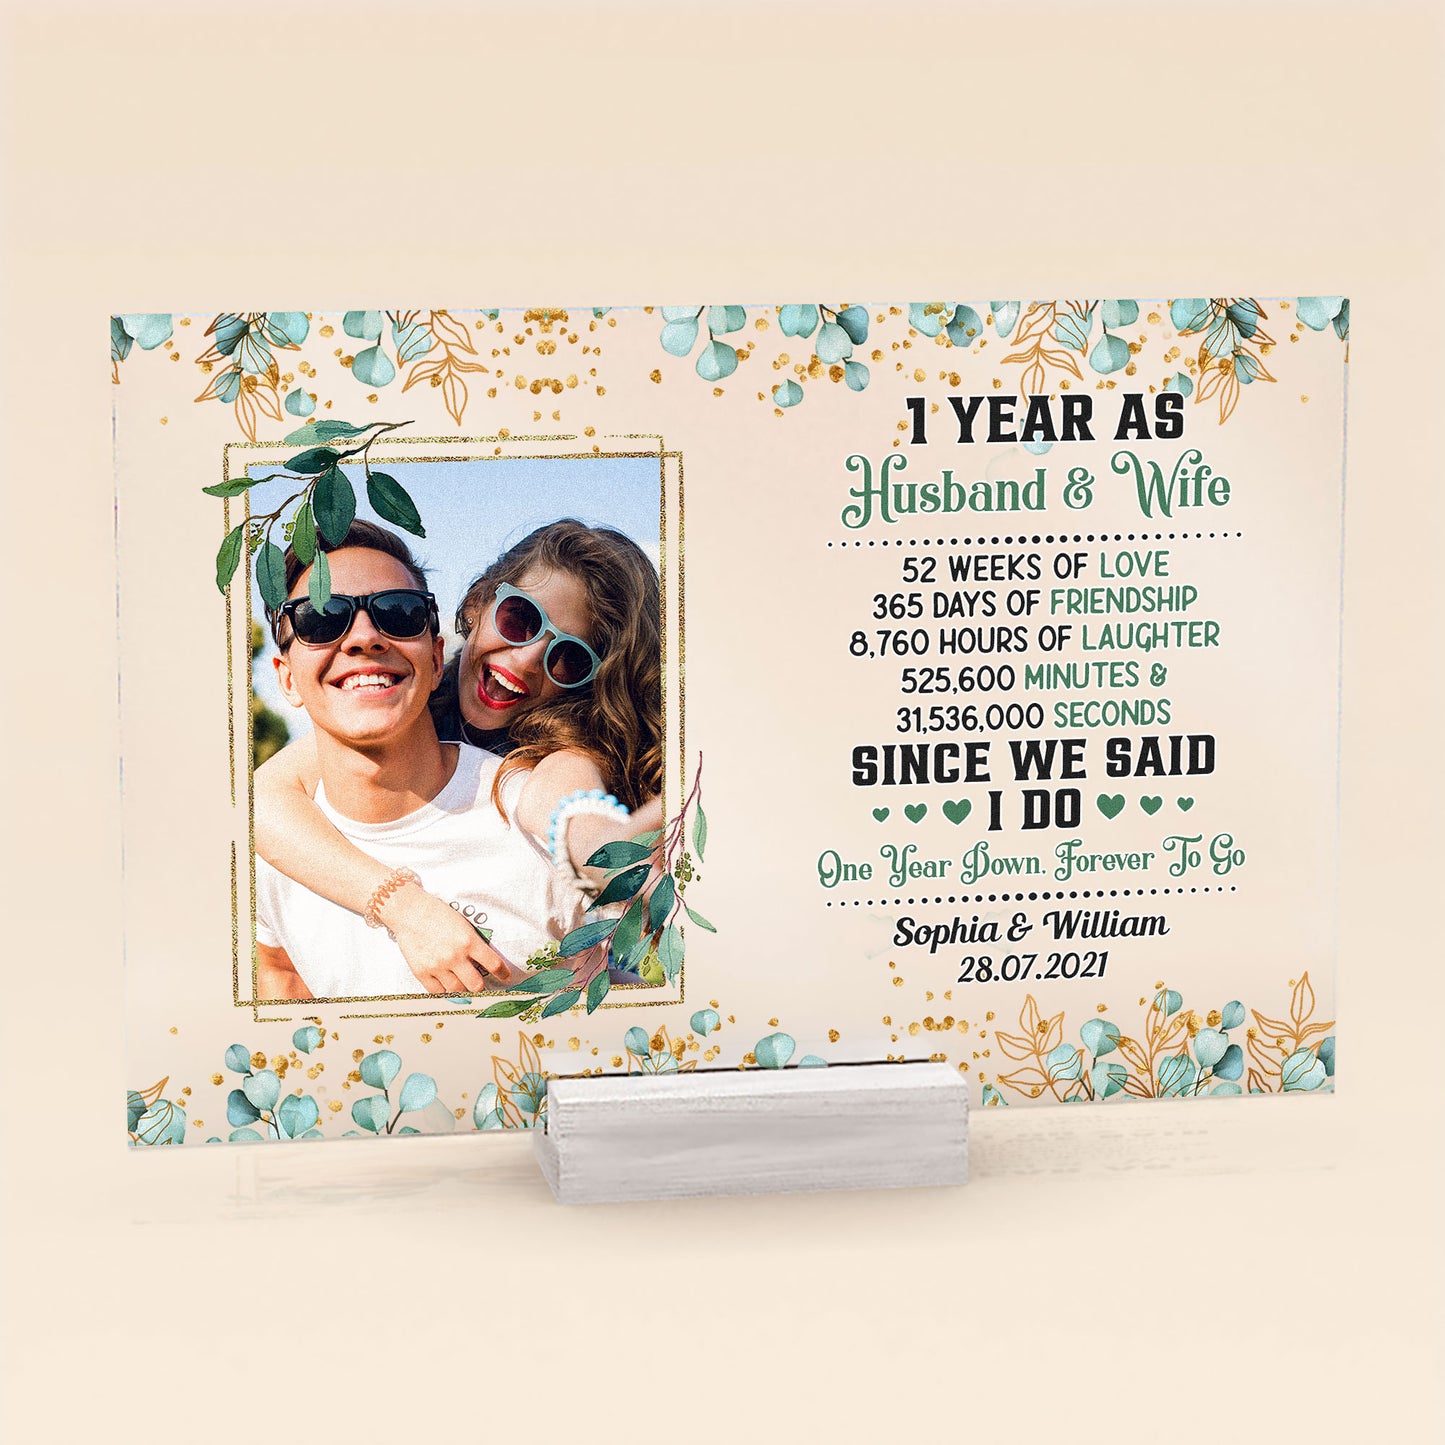 One Year Down Forever To Go - Personalized Acrylic Plaque - 1st Anniversary Gift For Couple, Husband, Wife